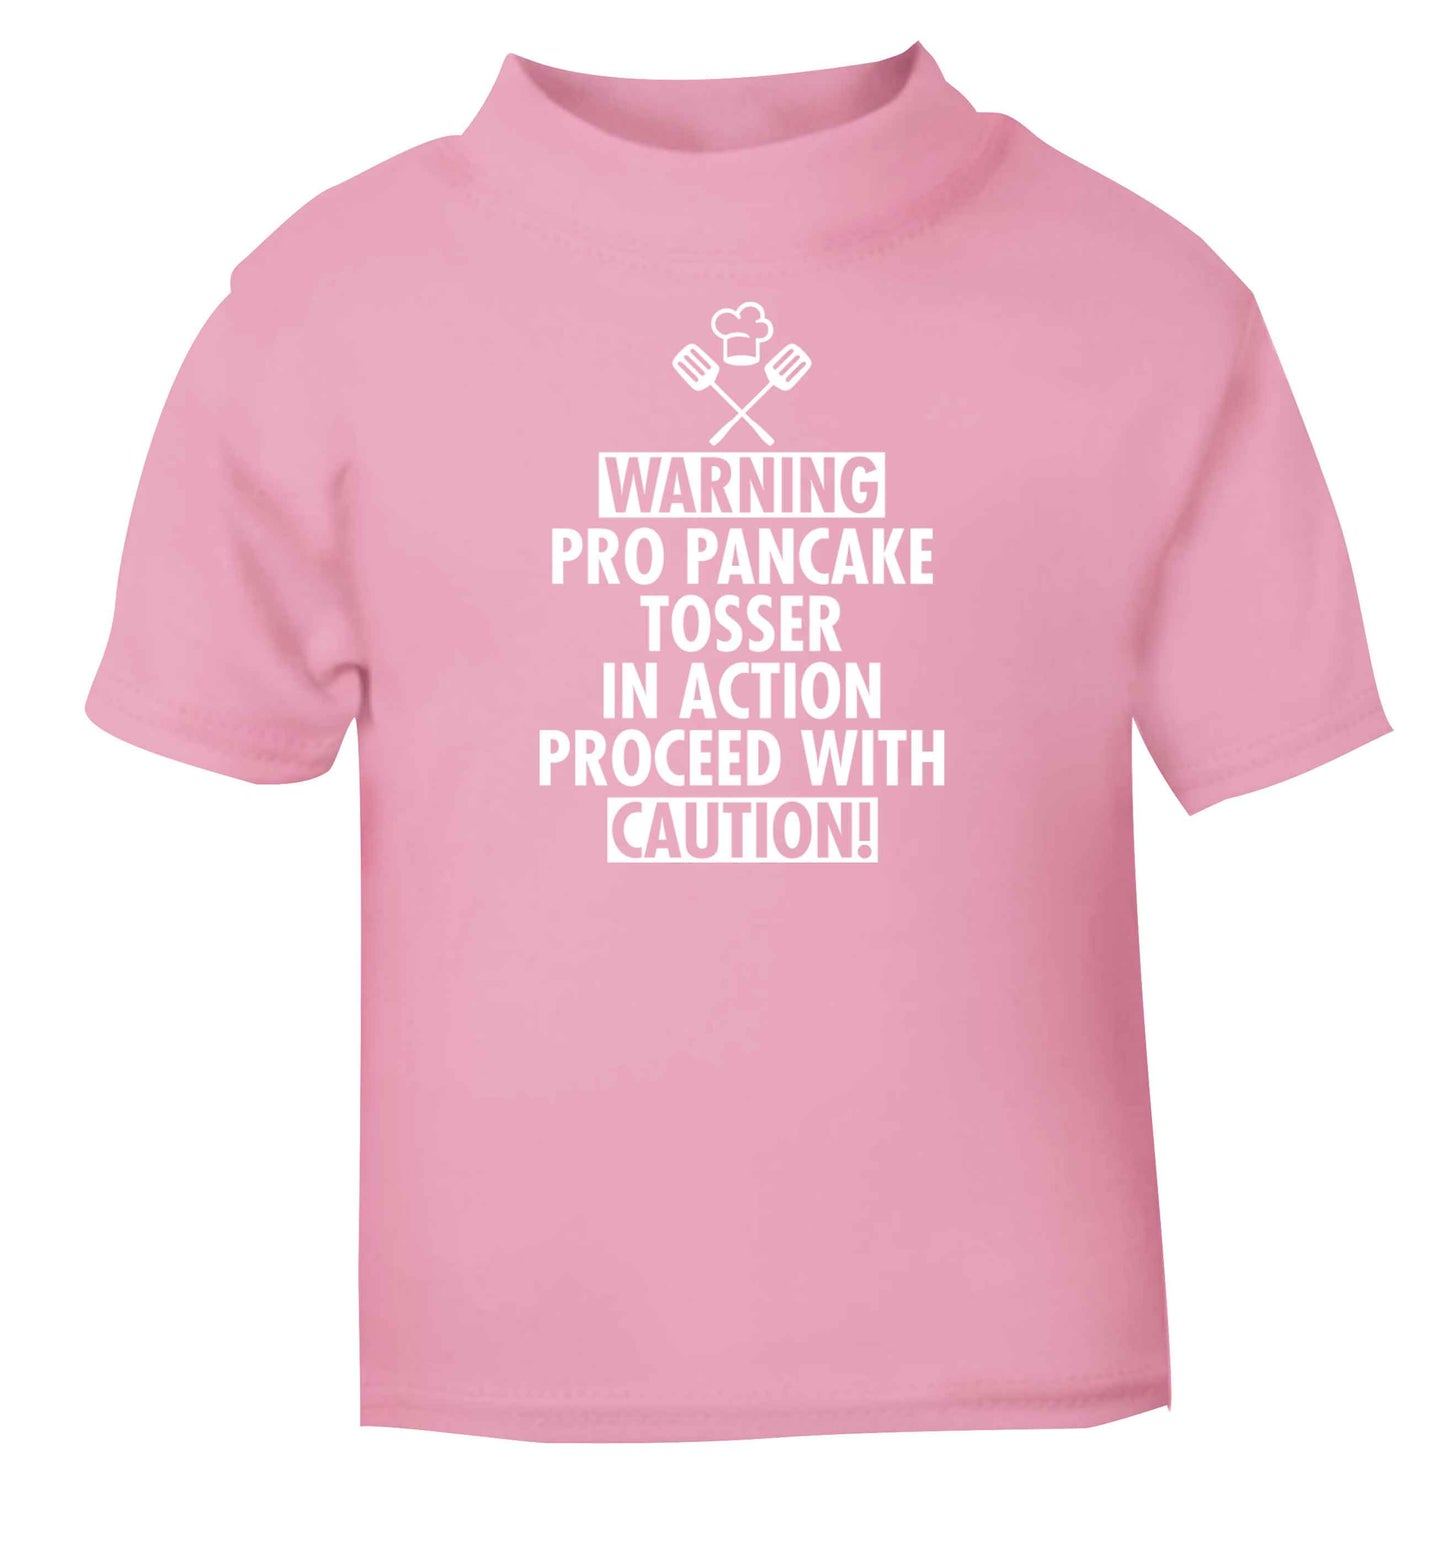 Warning pro pancake tosser in action proceed with caution light pink baby toddler Tshirt 2 Years